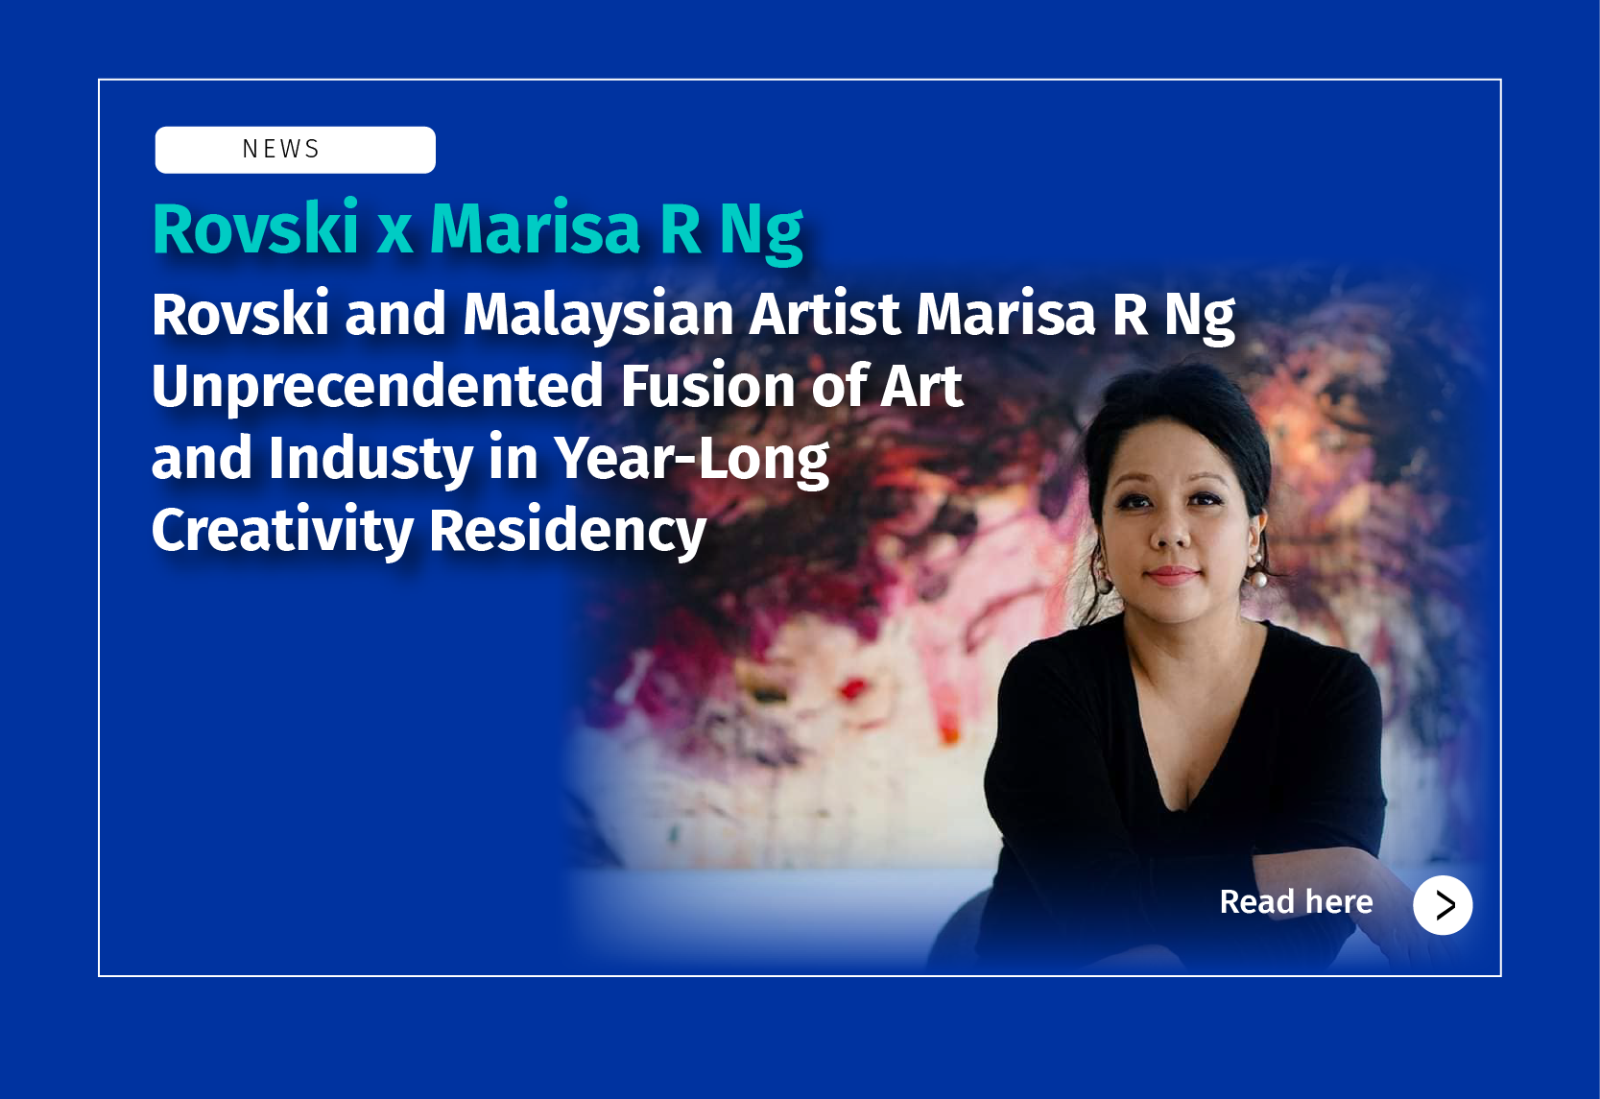 Rovski and Malaysian Artist Marisa R Ng Unveil Unprecedented Fusion of Art and Industry in Year-Long Creative Residency